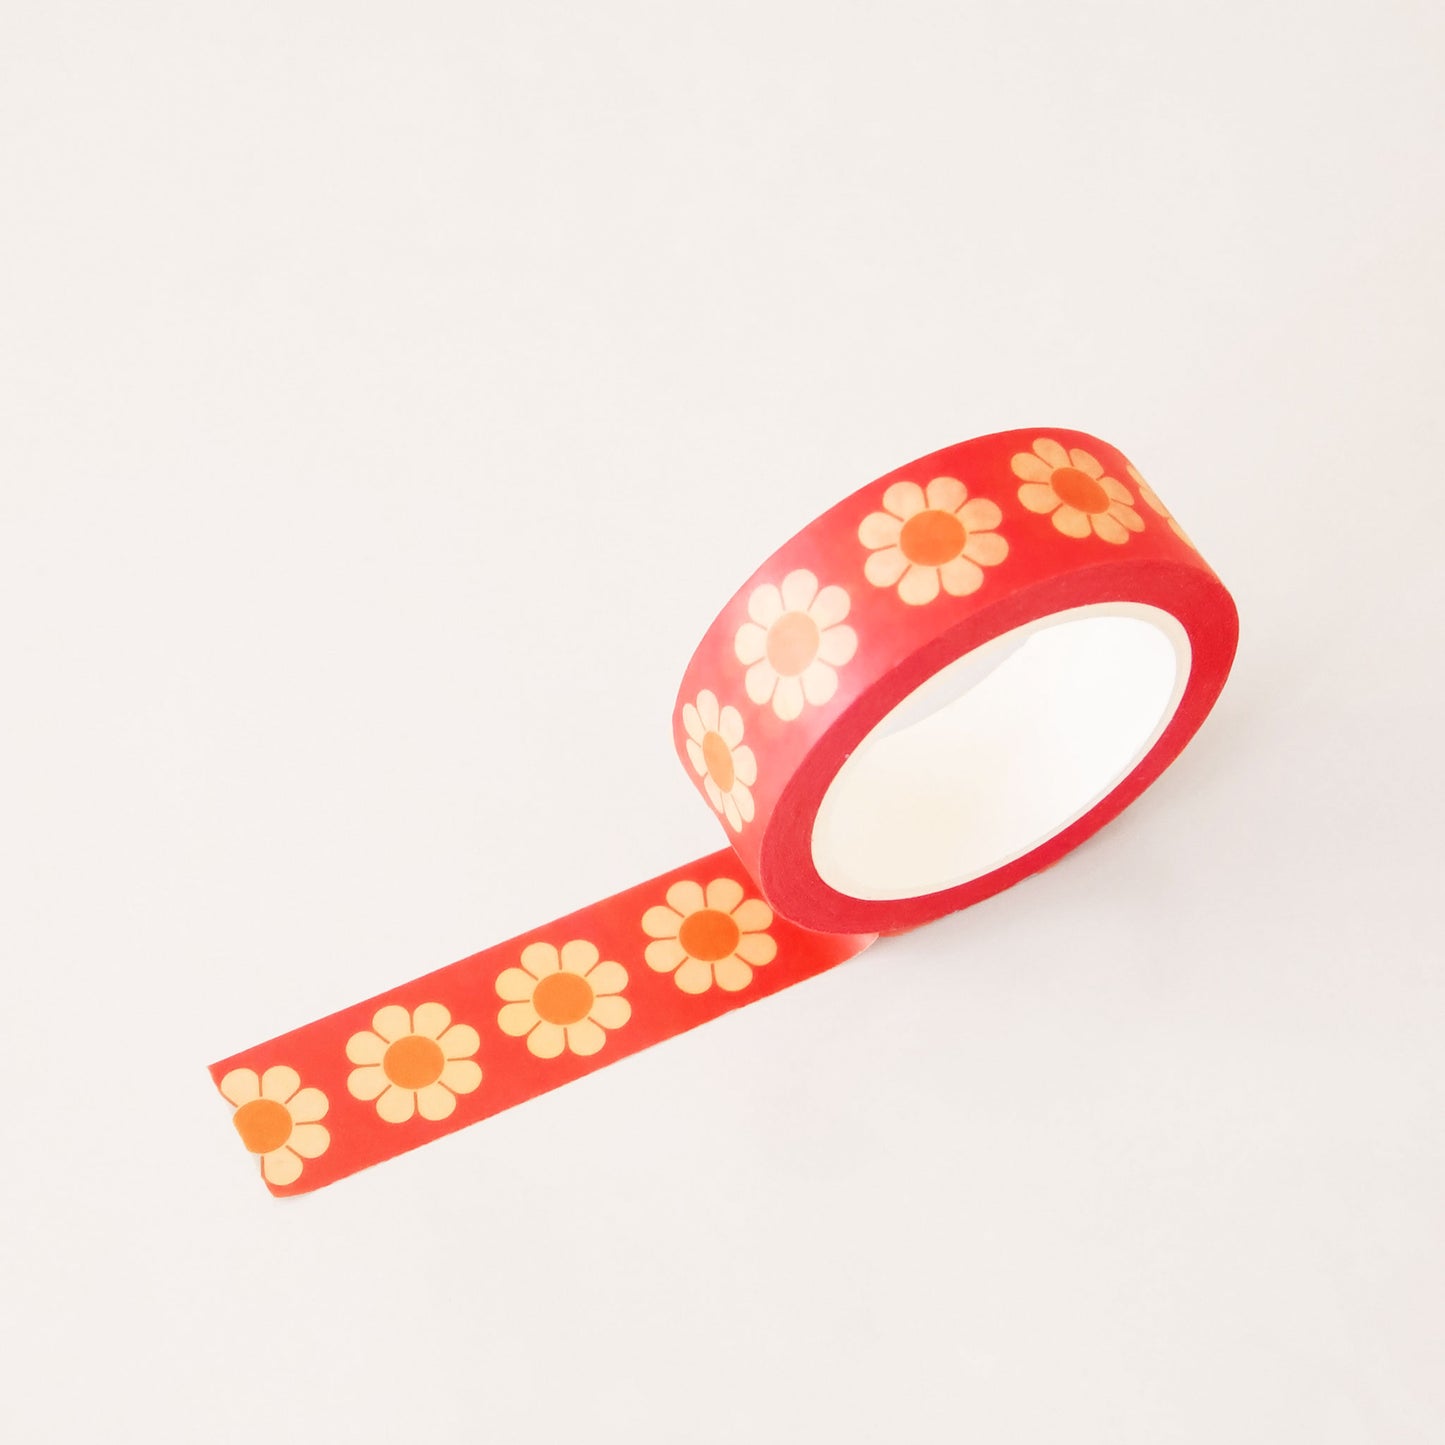 Roll of red washi tape covered in retro yellow and orange flowers. The roll is position upright, partially unrolled.